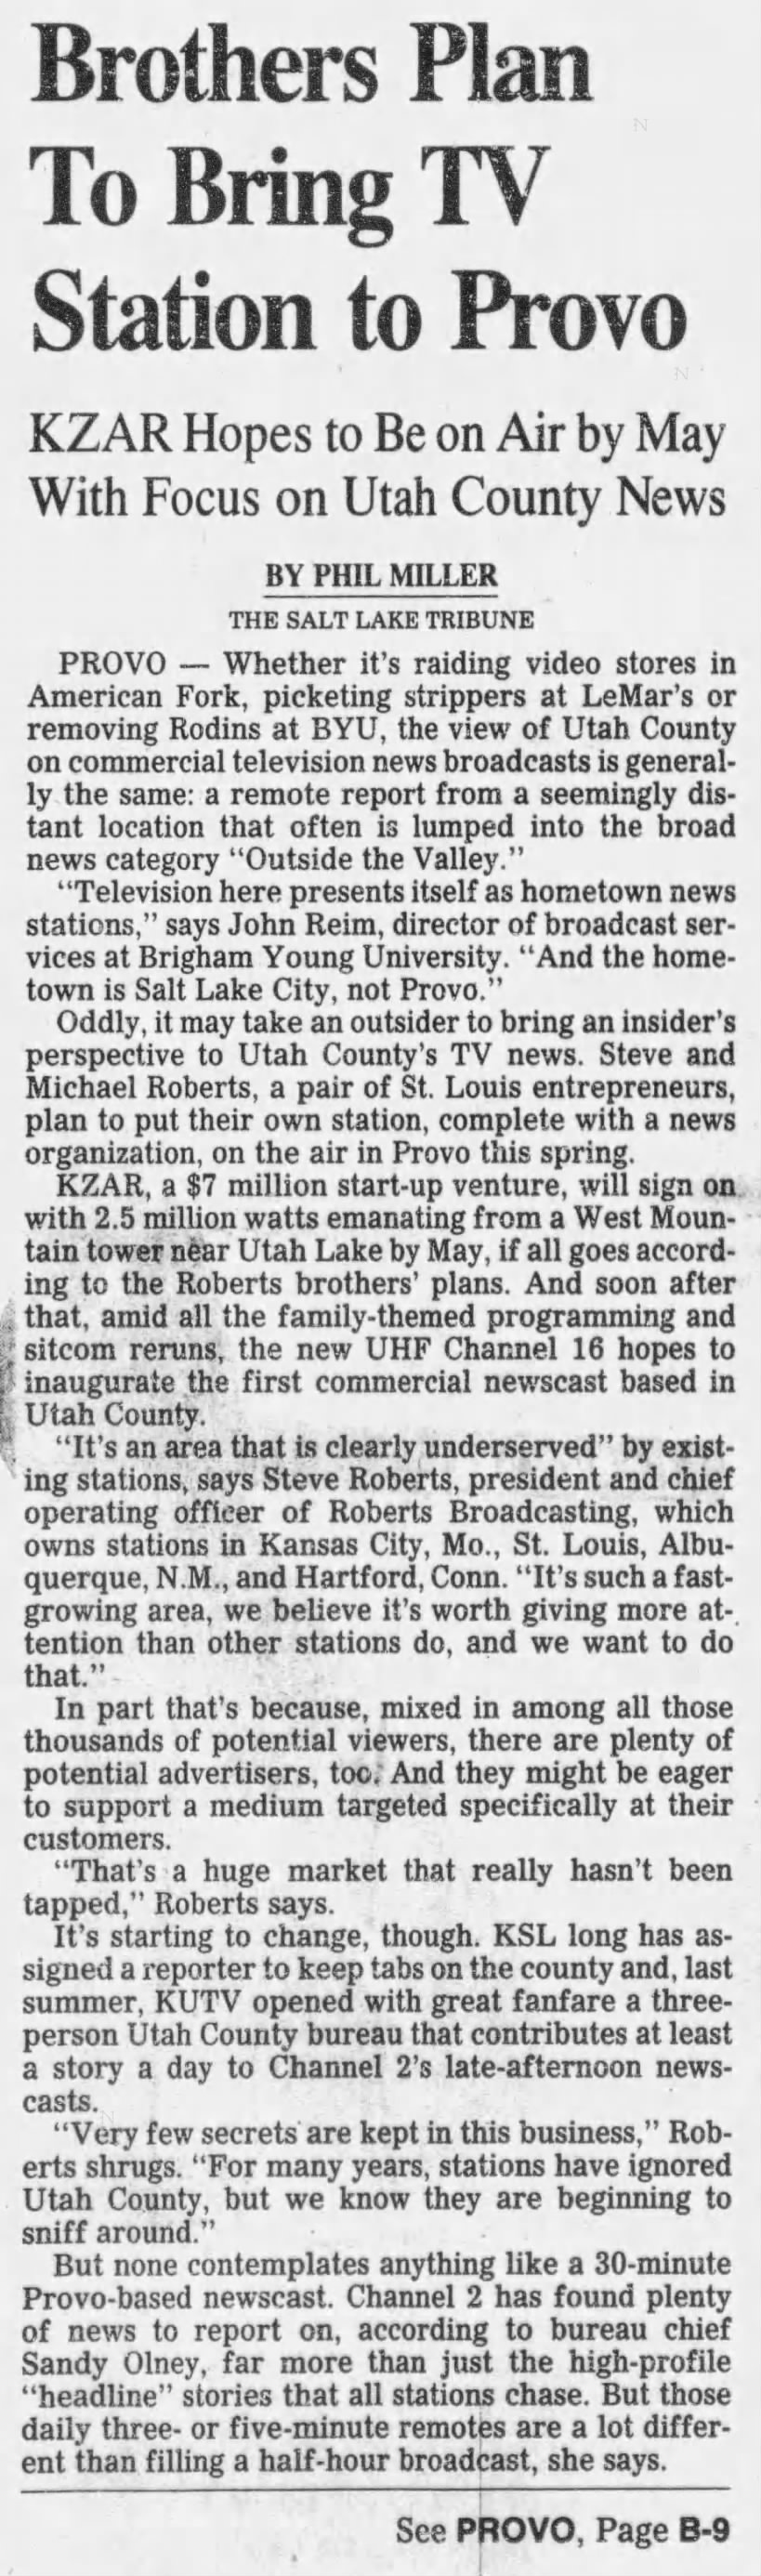 Brothers Plan To Bring TV Station to Prove: KZAR Hopes to Be on Air by May With Focus on Utah County